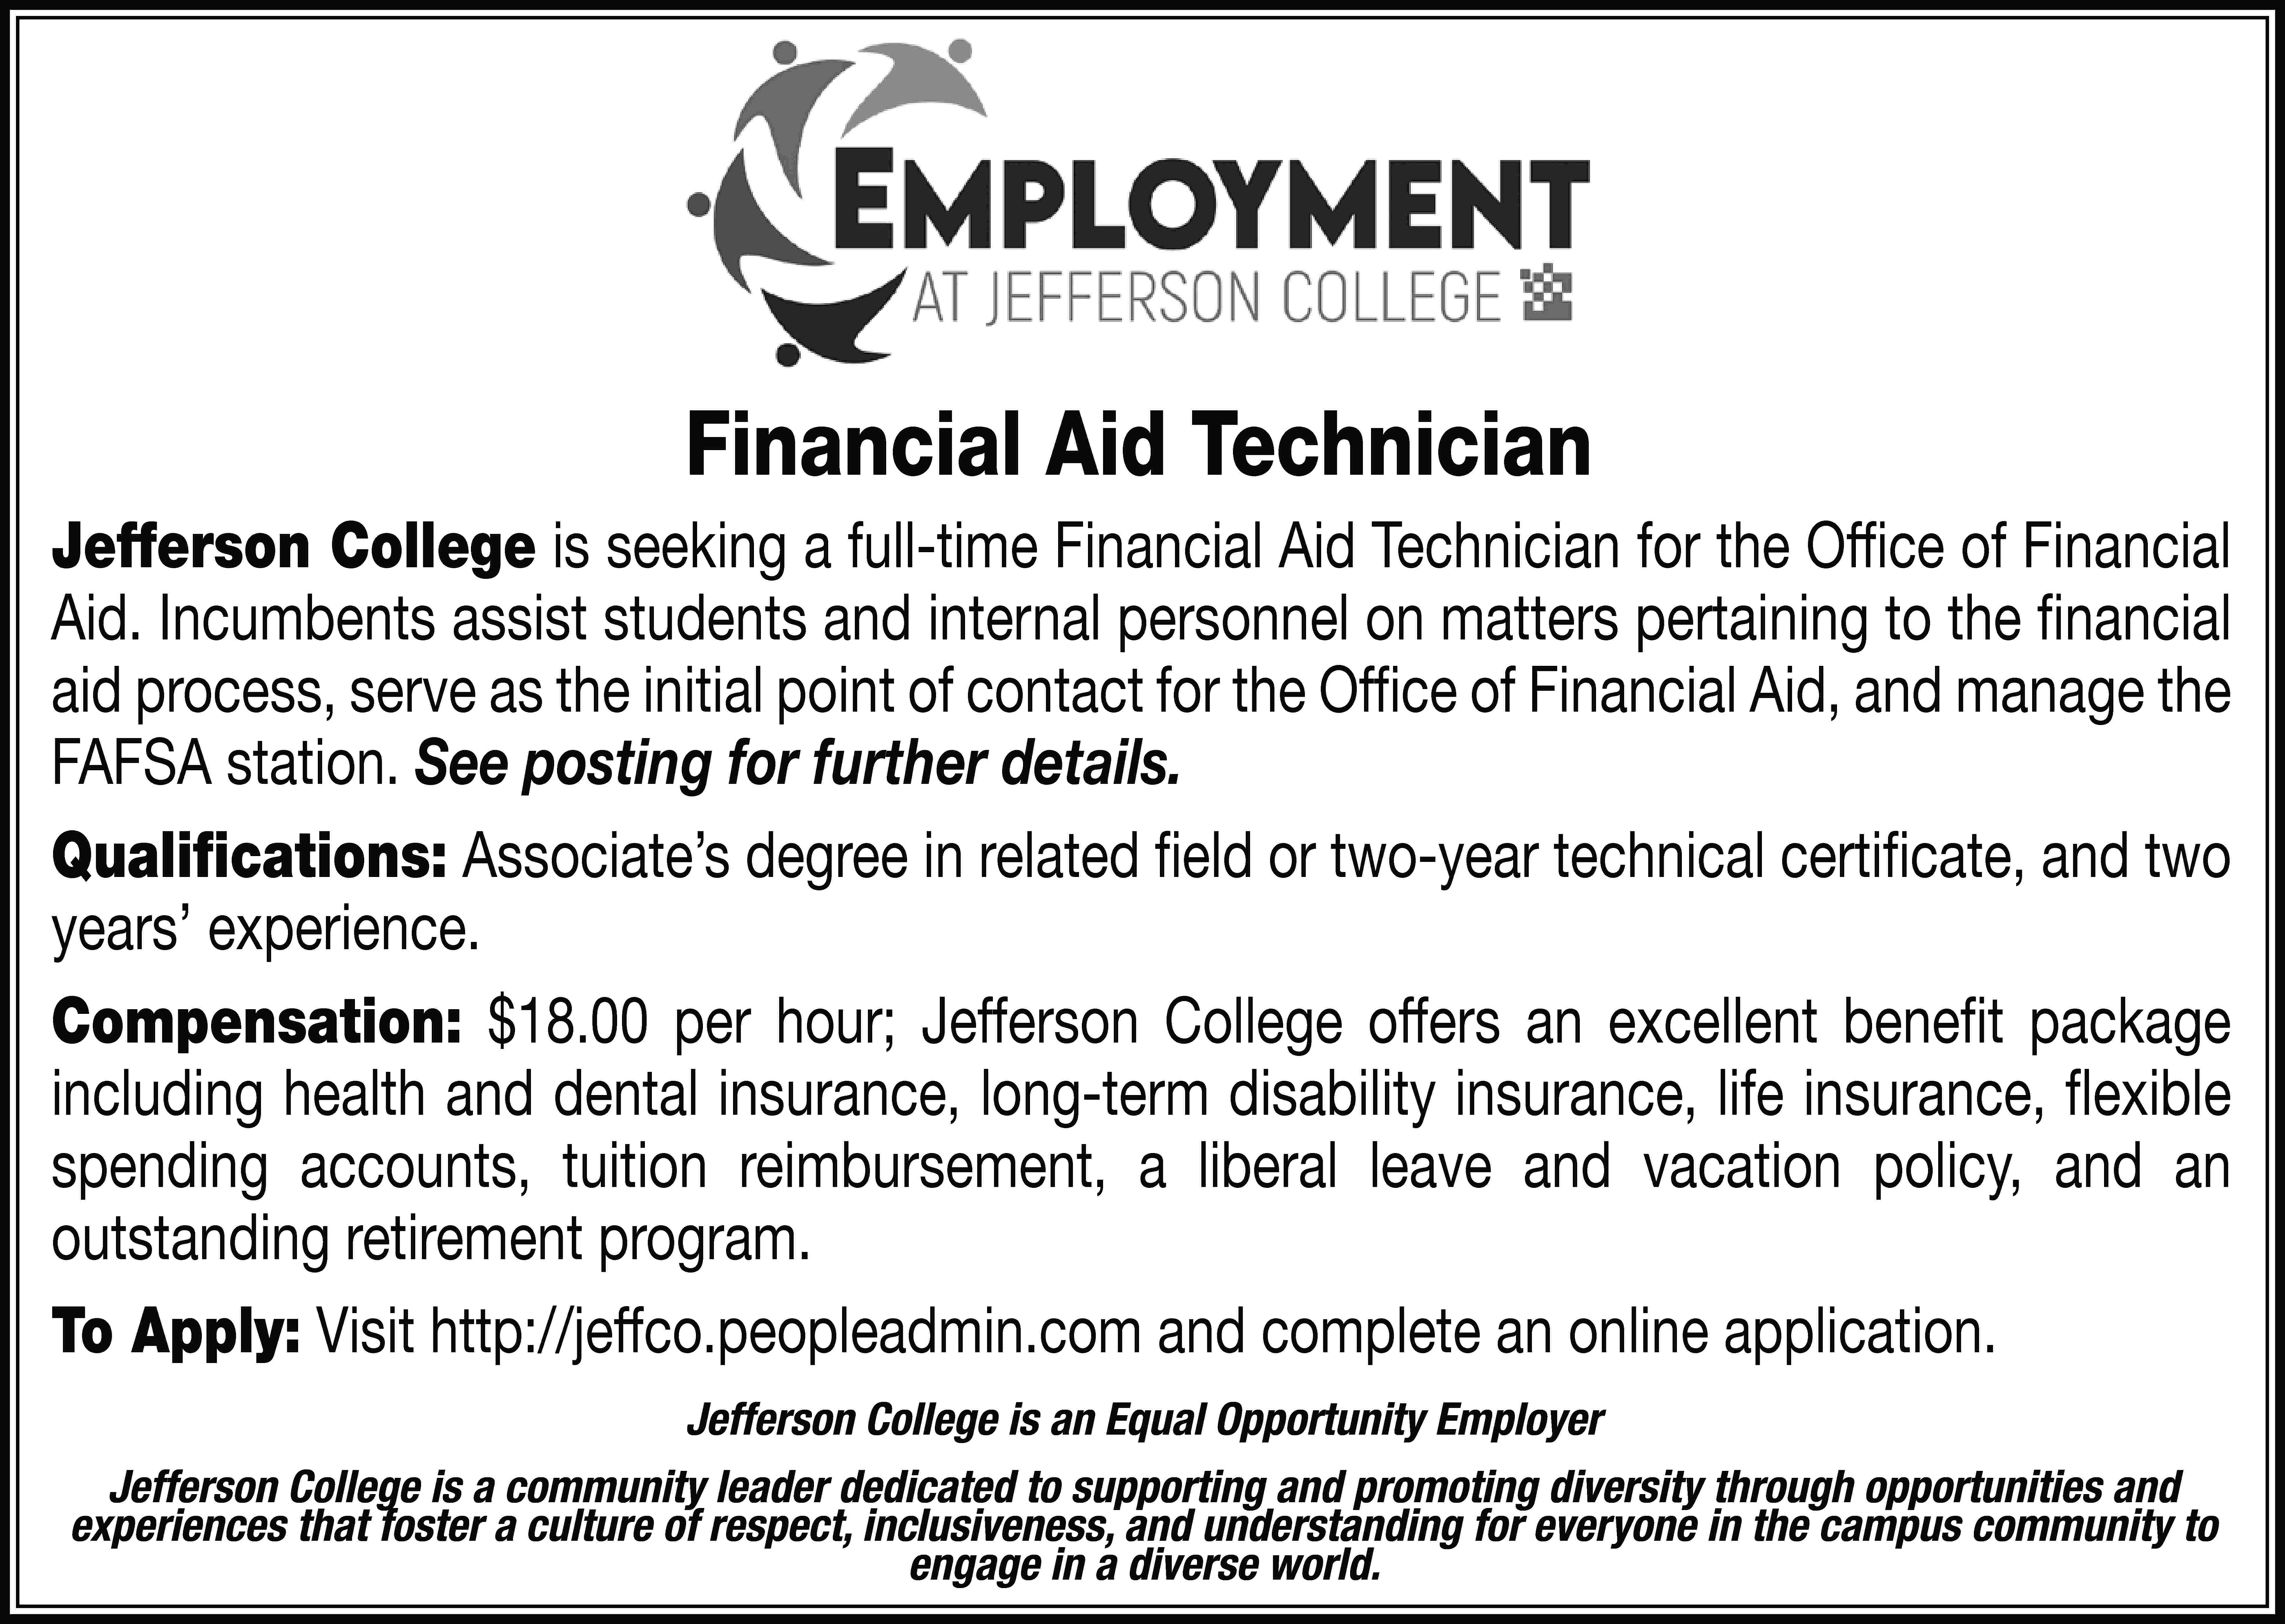 Financial Aid Technician Jefferson College  Financial Aid Technician Jefferson College is seeking a full-time Financial Aid Technician for the Office of Financial Aid. Incumbents assist students and internal personnel on matters pertaining to the financial aid process, serve as the initial point of contact for the Office of Financial Aid, and manage the FAFSA station. See posting for further details. Qualifications: Associate’s degree in related field or two-year technical certificate, and two years’ experience. Compensation: $18.00 per hour; Jefferson College offers an excellent benefit package including health and dental insurance, long-term disability insurance, life insurance, flexible spending accounts, tuition reimbursement, a liberal leave and vacation policy, and an outstanding retirement program. To Apply: Visit http://jeffco.peopleadmin.com and complete an online application. Jefferson College is an Equal Opportunity Employer Jefferson College is a community leader dedicated to supporting and promoting diversity through opportunities and experiences that foster a culture of respect, inclusiveness, and understanding for everyone in the campus community to engage in a diverse world.